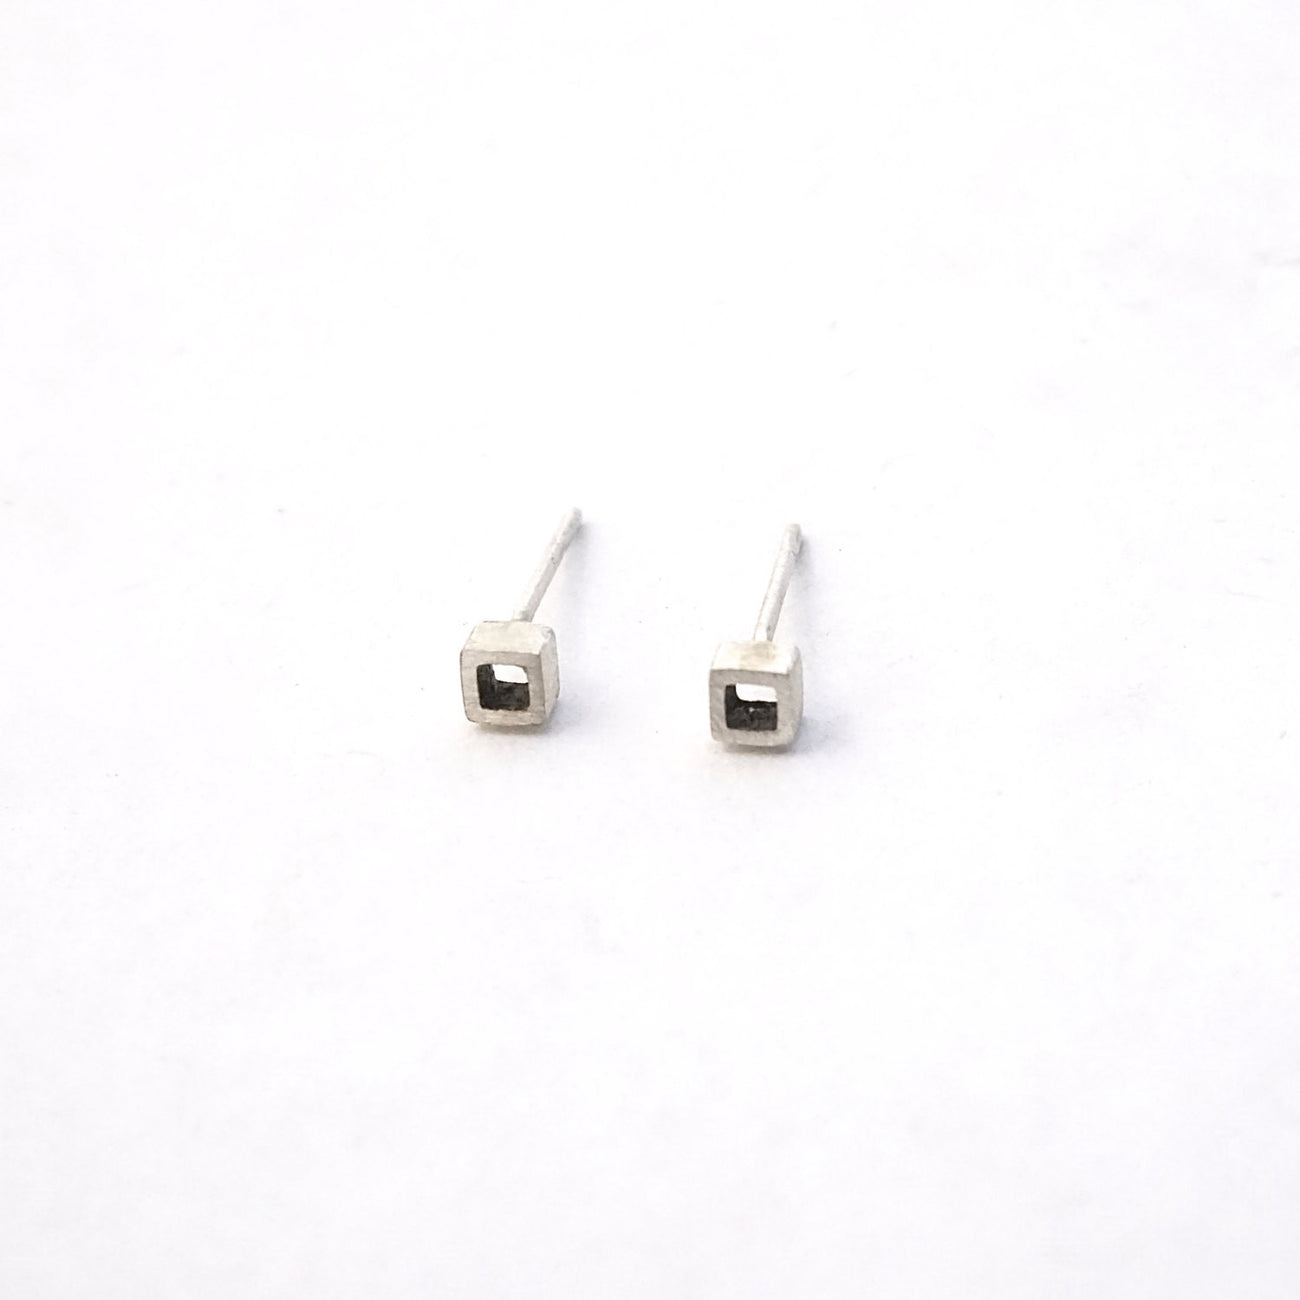 Contemporary Hand-Crafted Open Square Stud Earrings - 0160 - Virginia Wynne Designs